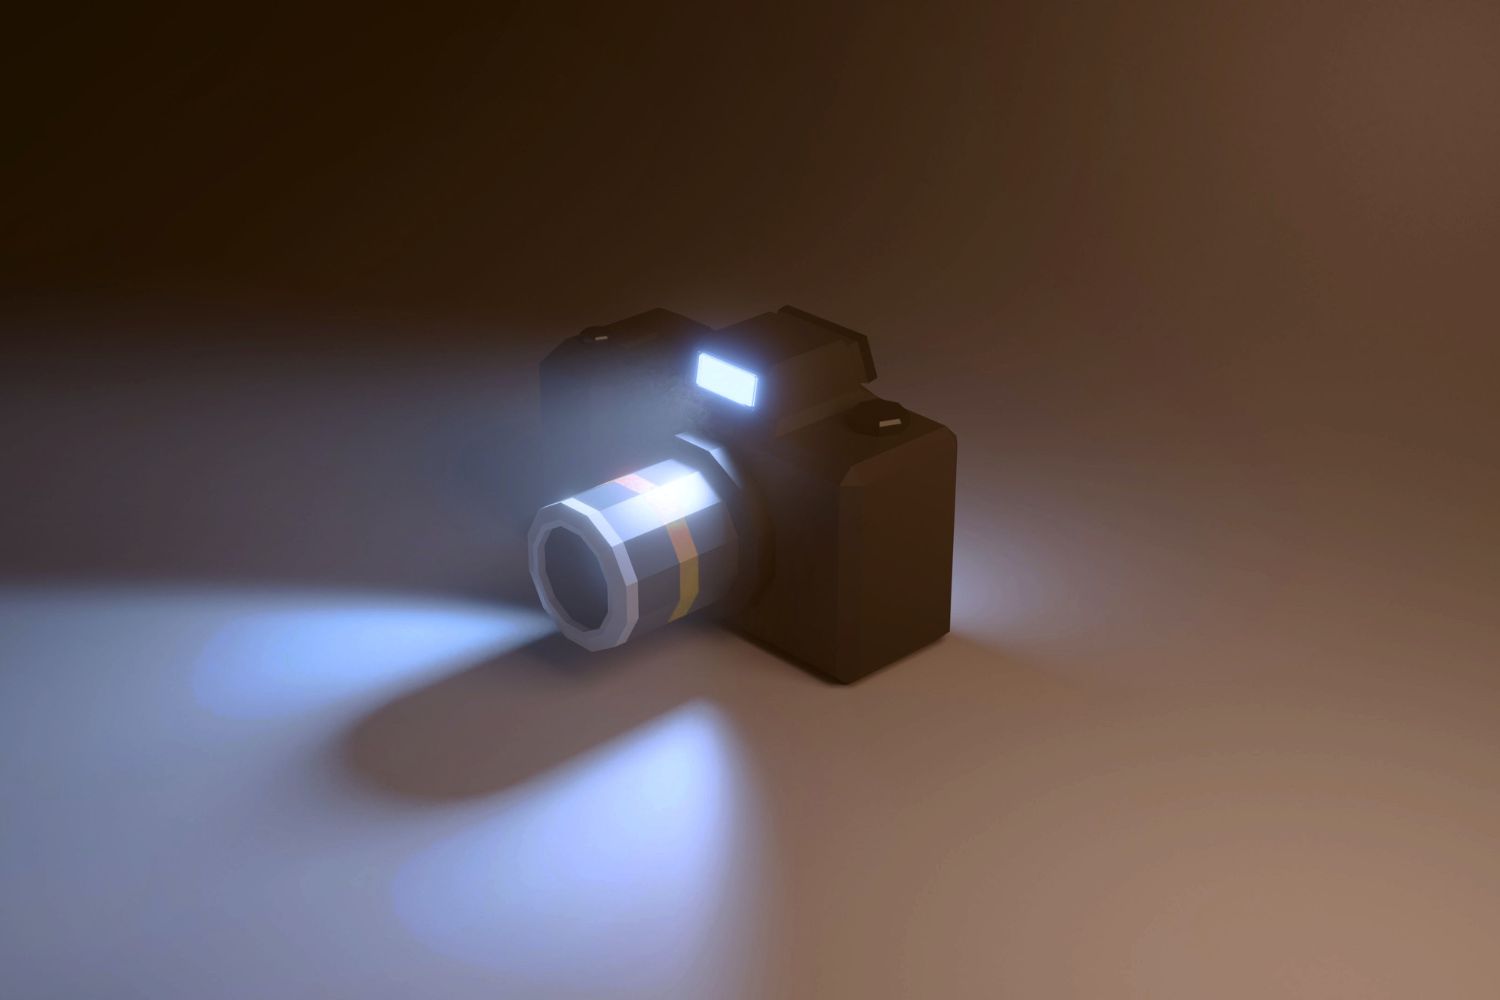 3d pictures of camera with flash light Photo by Cameron Shurley on unsplash